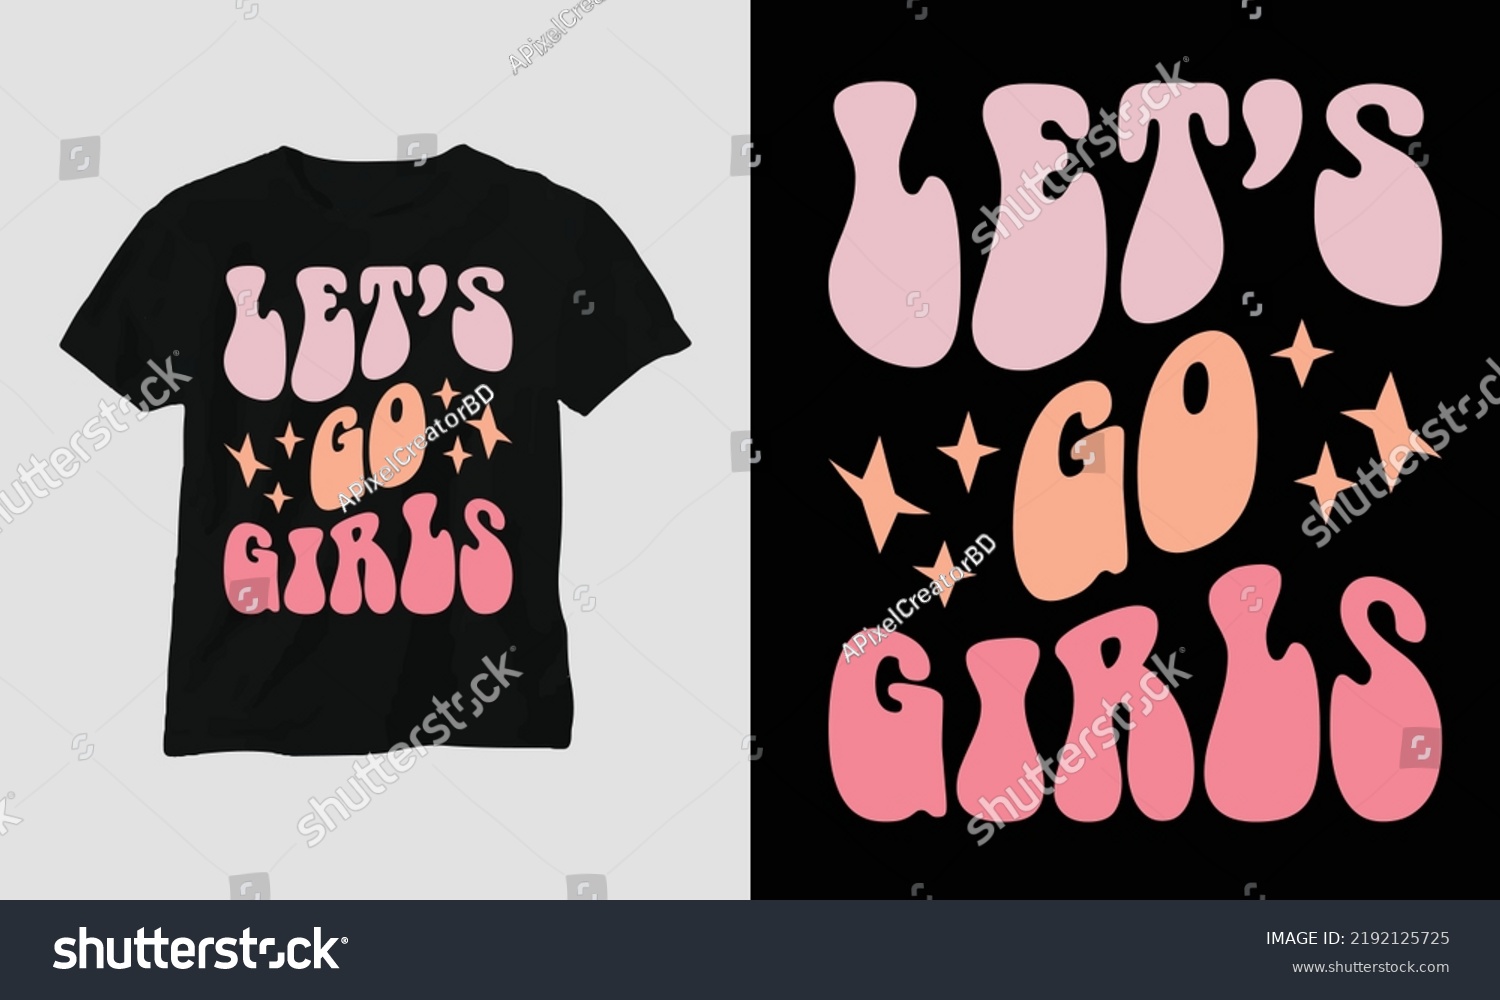 SVG of Wavy Retro Groovy T-shirt Design. Quotes with “let’s go girls” Design vector Graphic Design T-Shirt, mag, sticker, wall mat, etc. Design vector Graphic Template svg